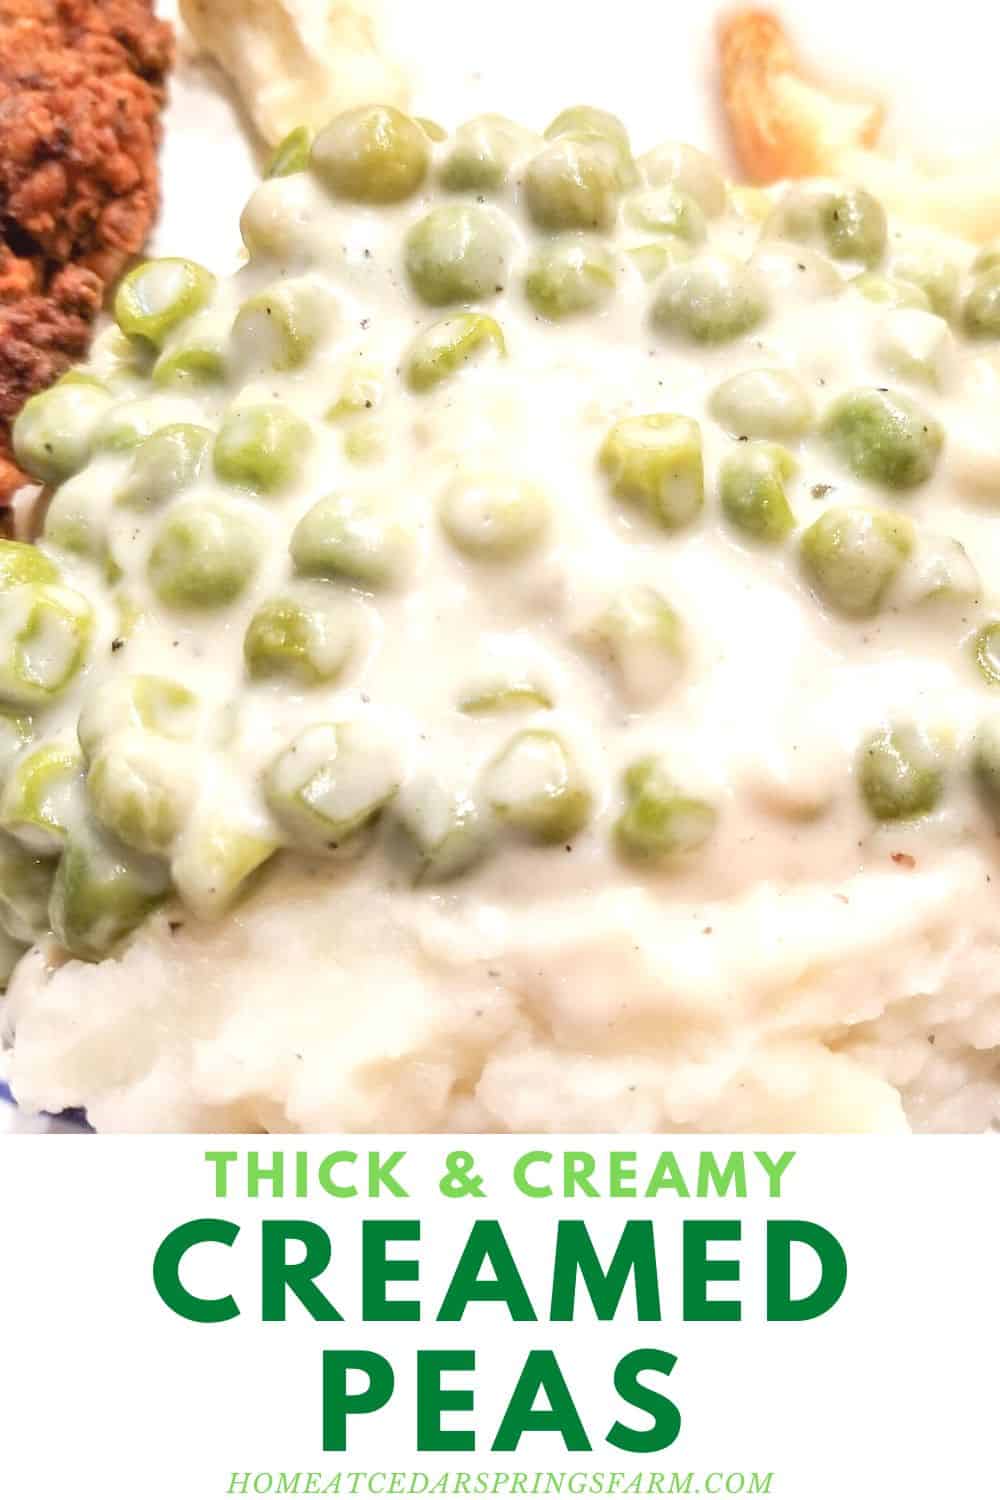 Creamed Peas over mashed potatoes on a plate with text overlay.